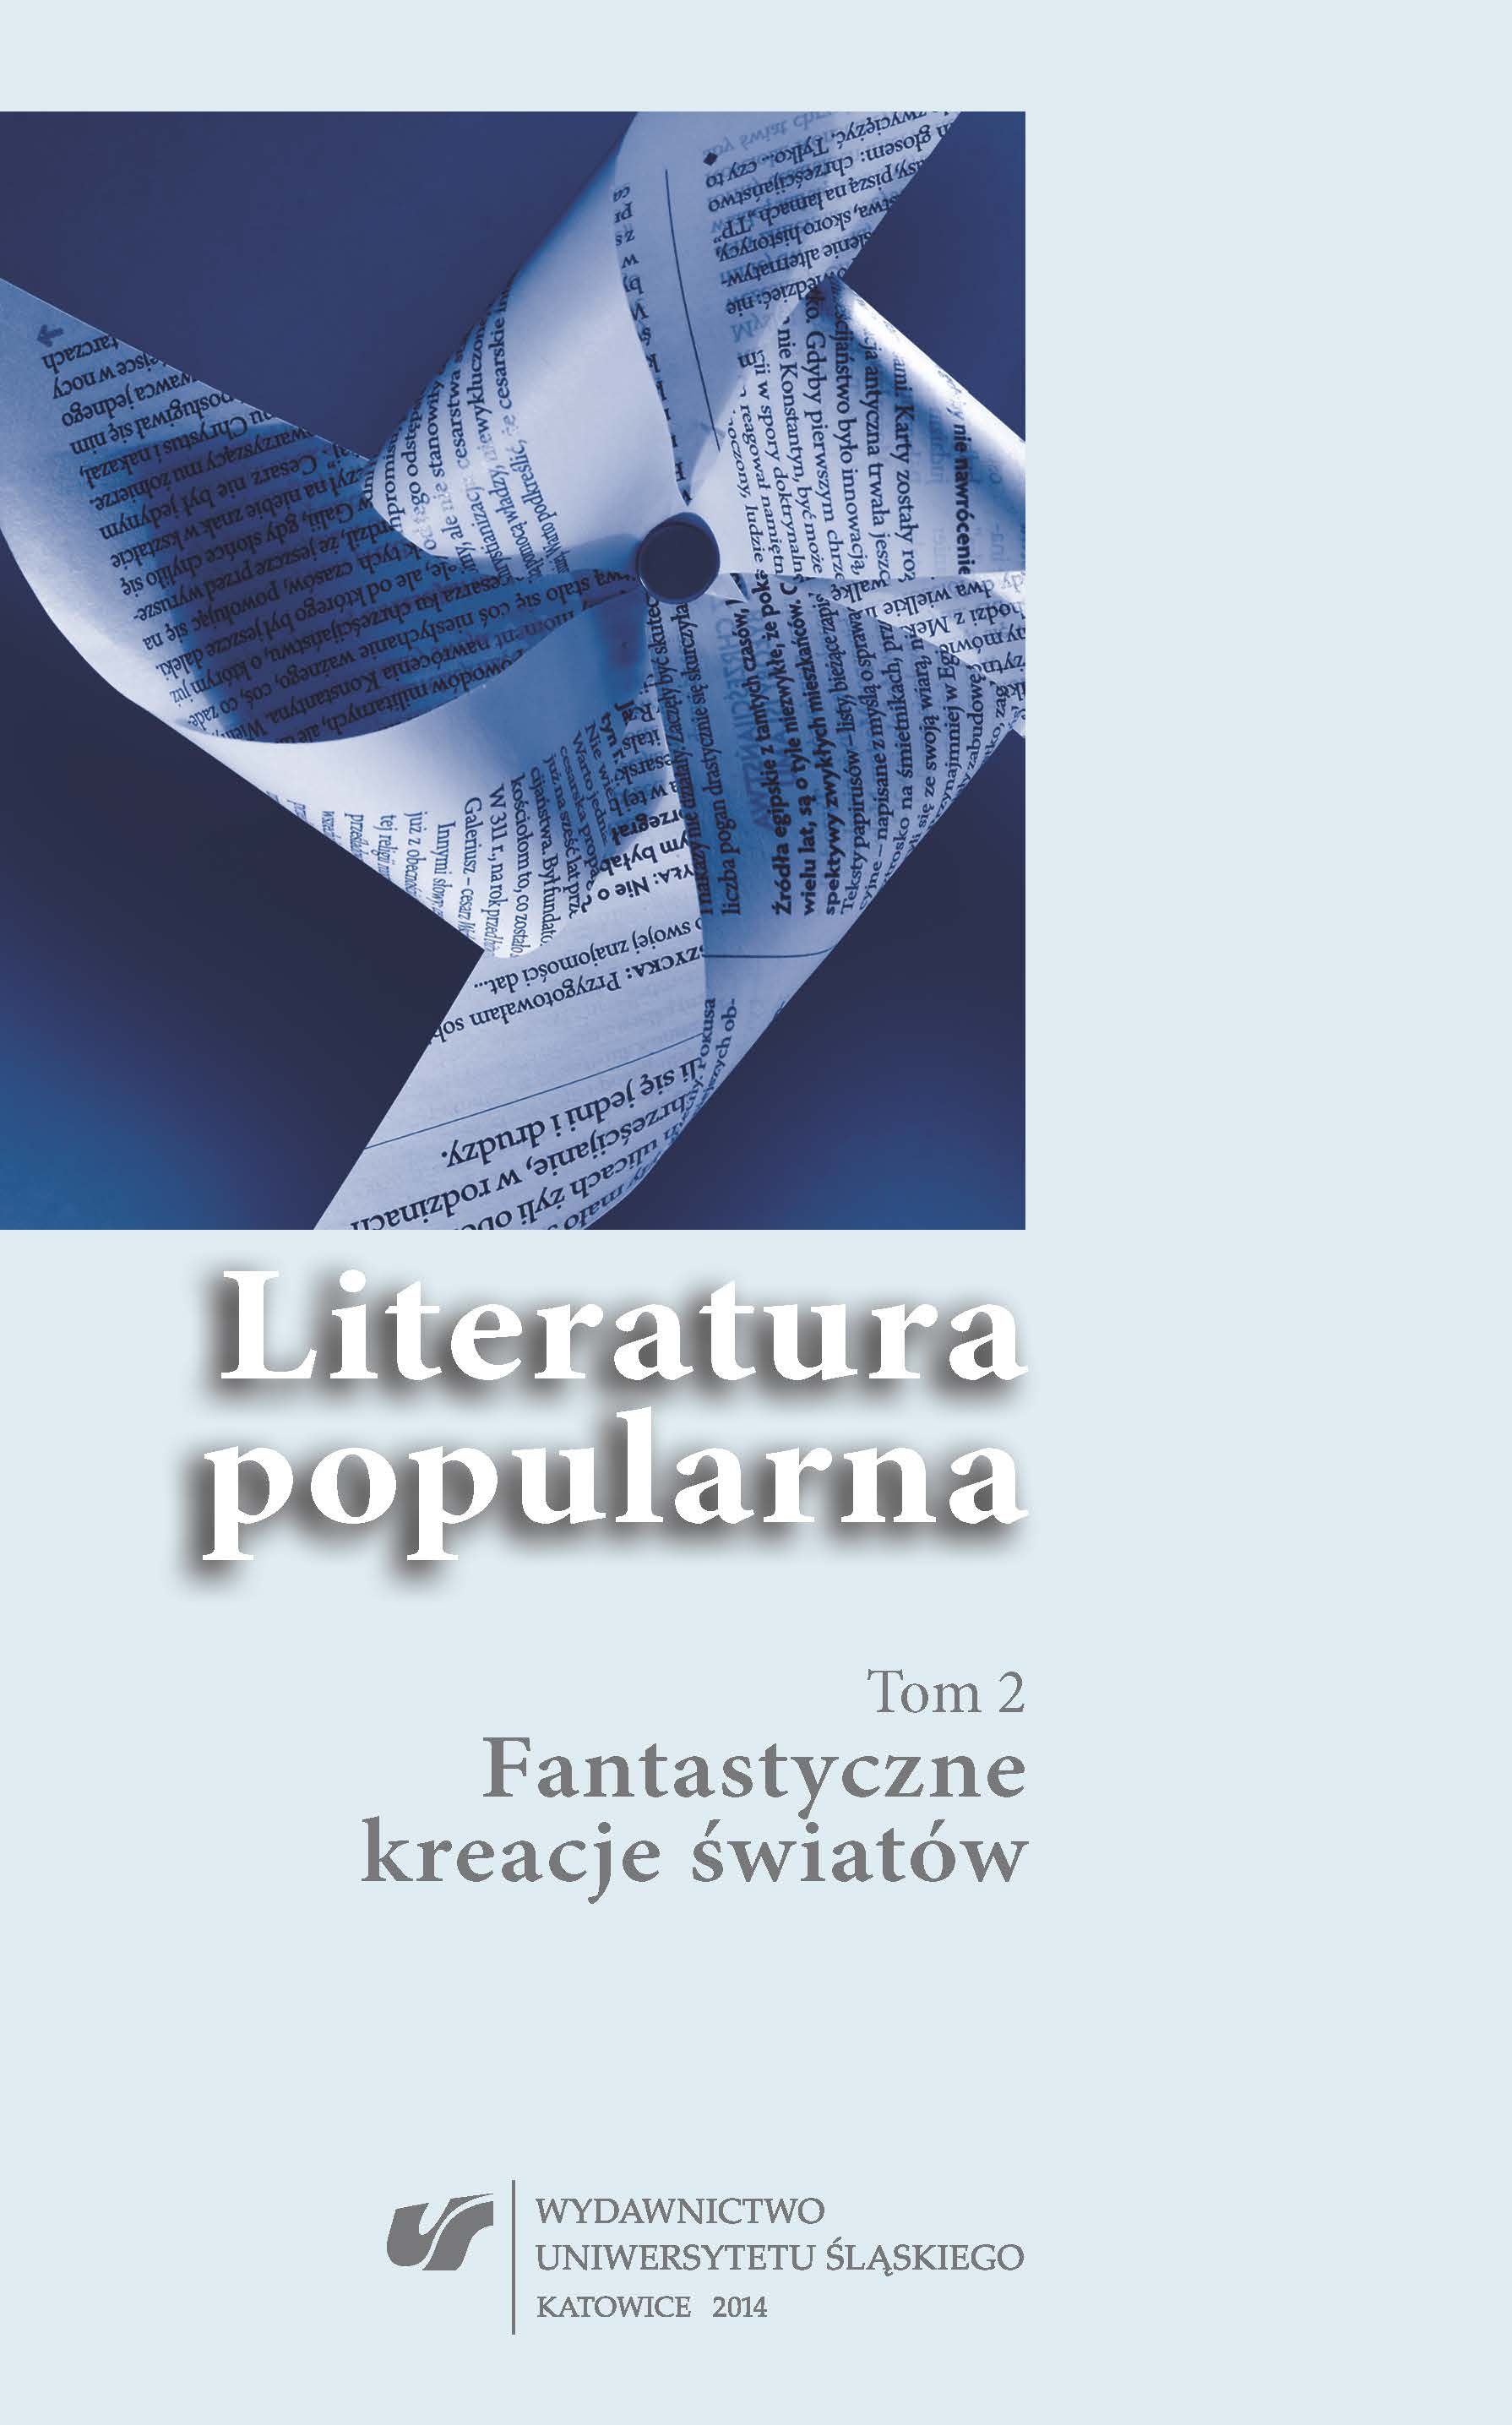 Fiction and Realism Cover Image